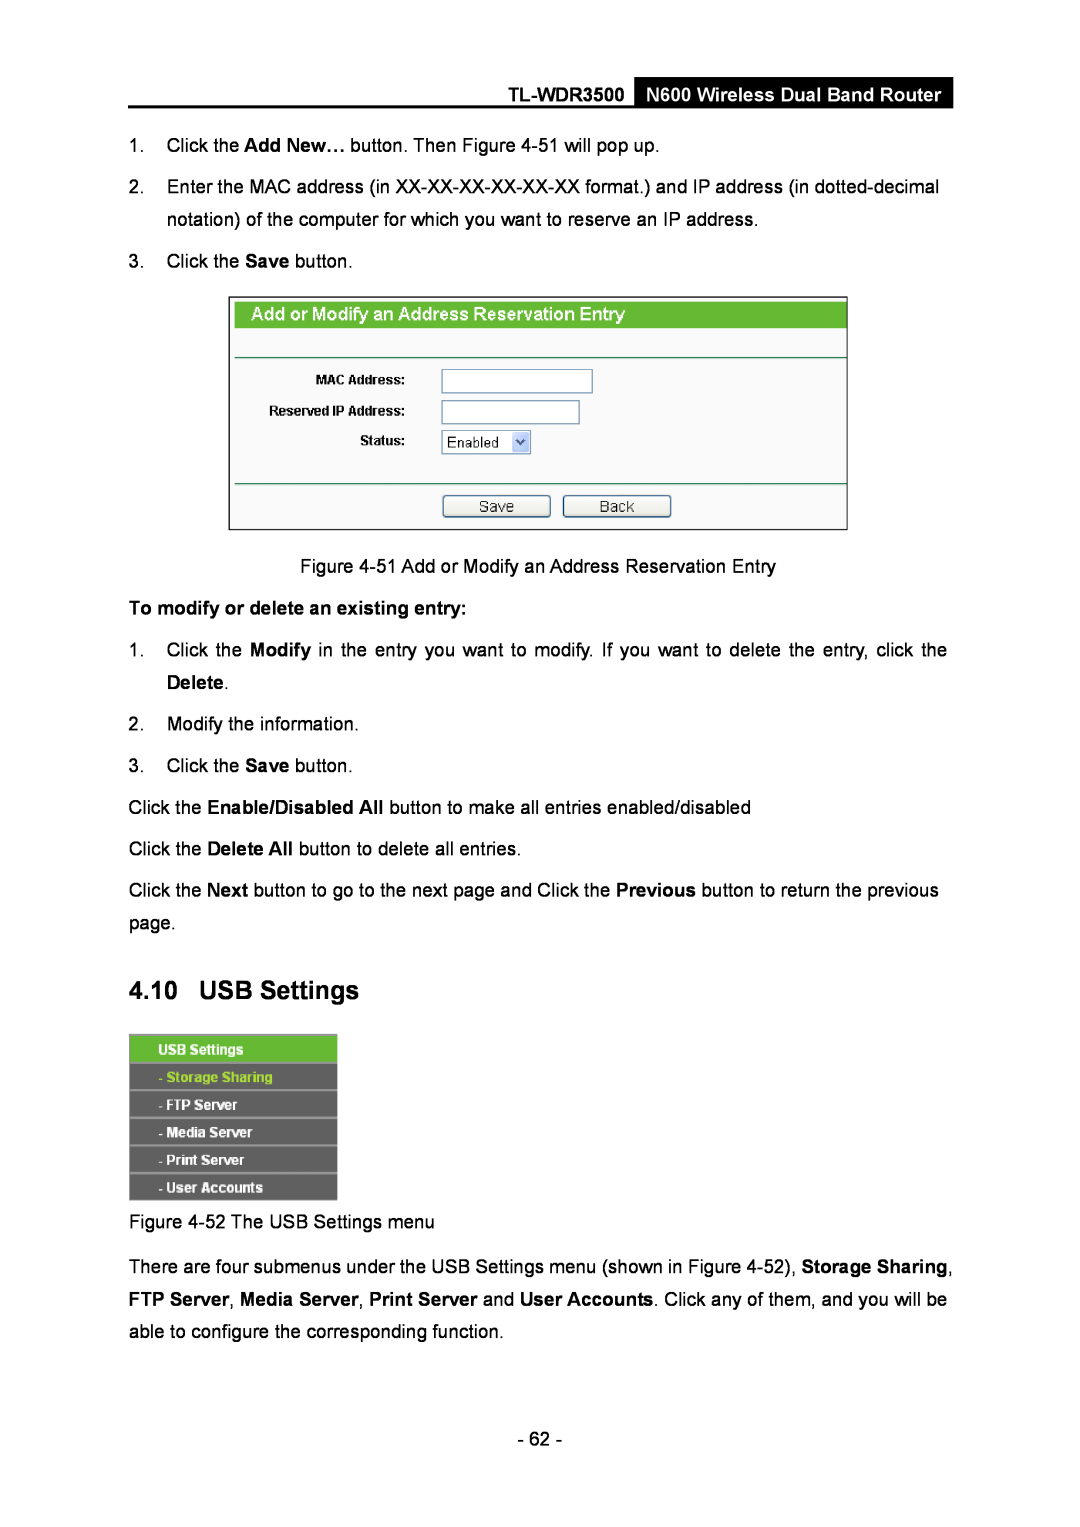 TP-Link manual USB Settings, TL-WDR3500 N600 Wireless Dual Band Router, To modify or delete an existing entry 